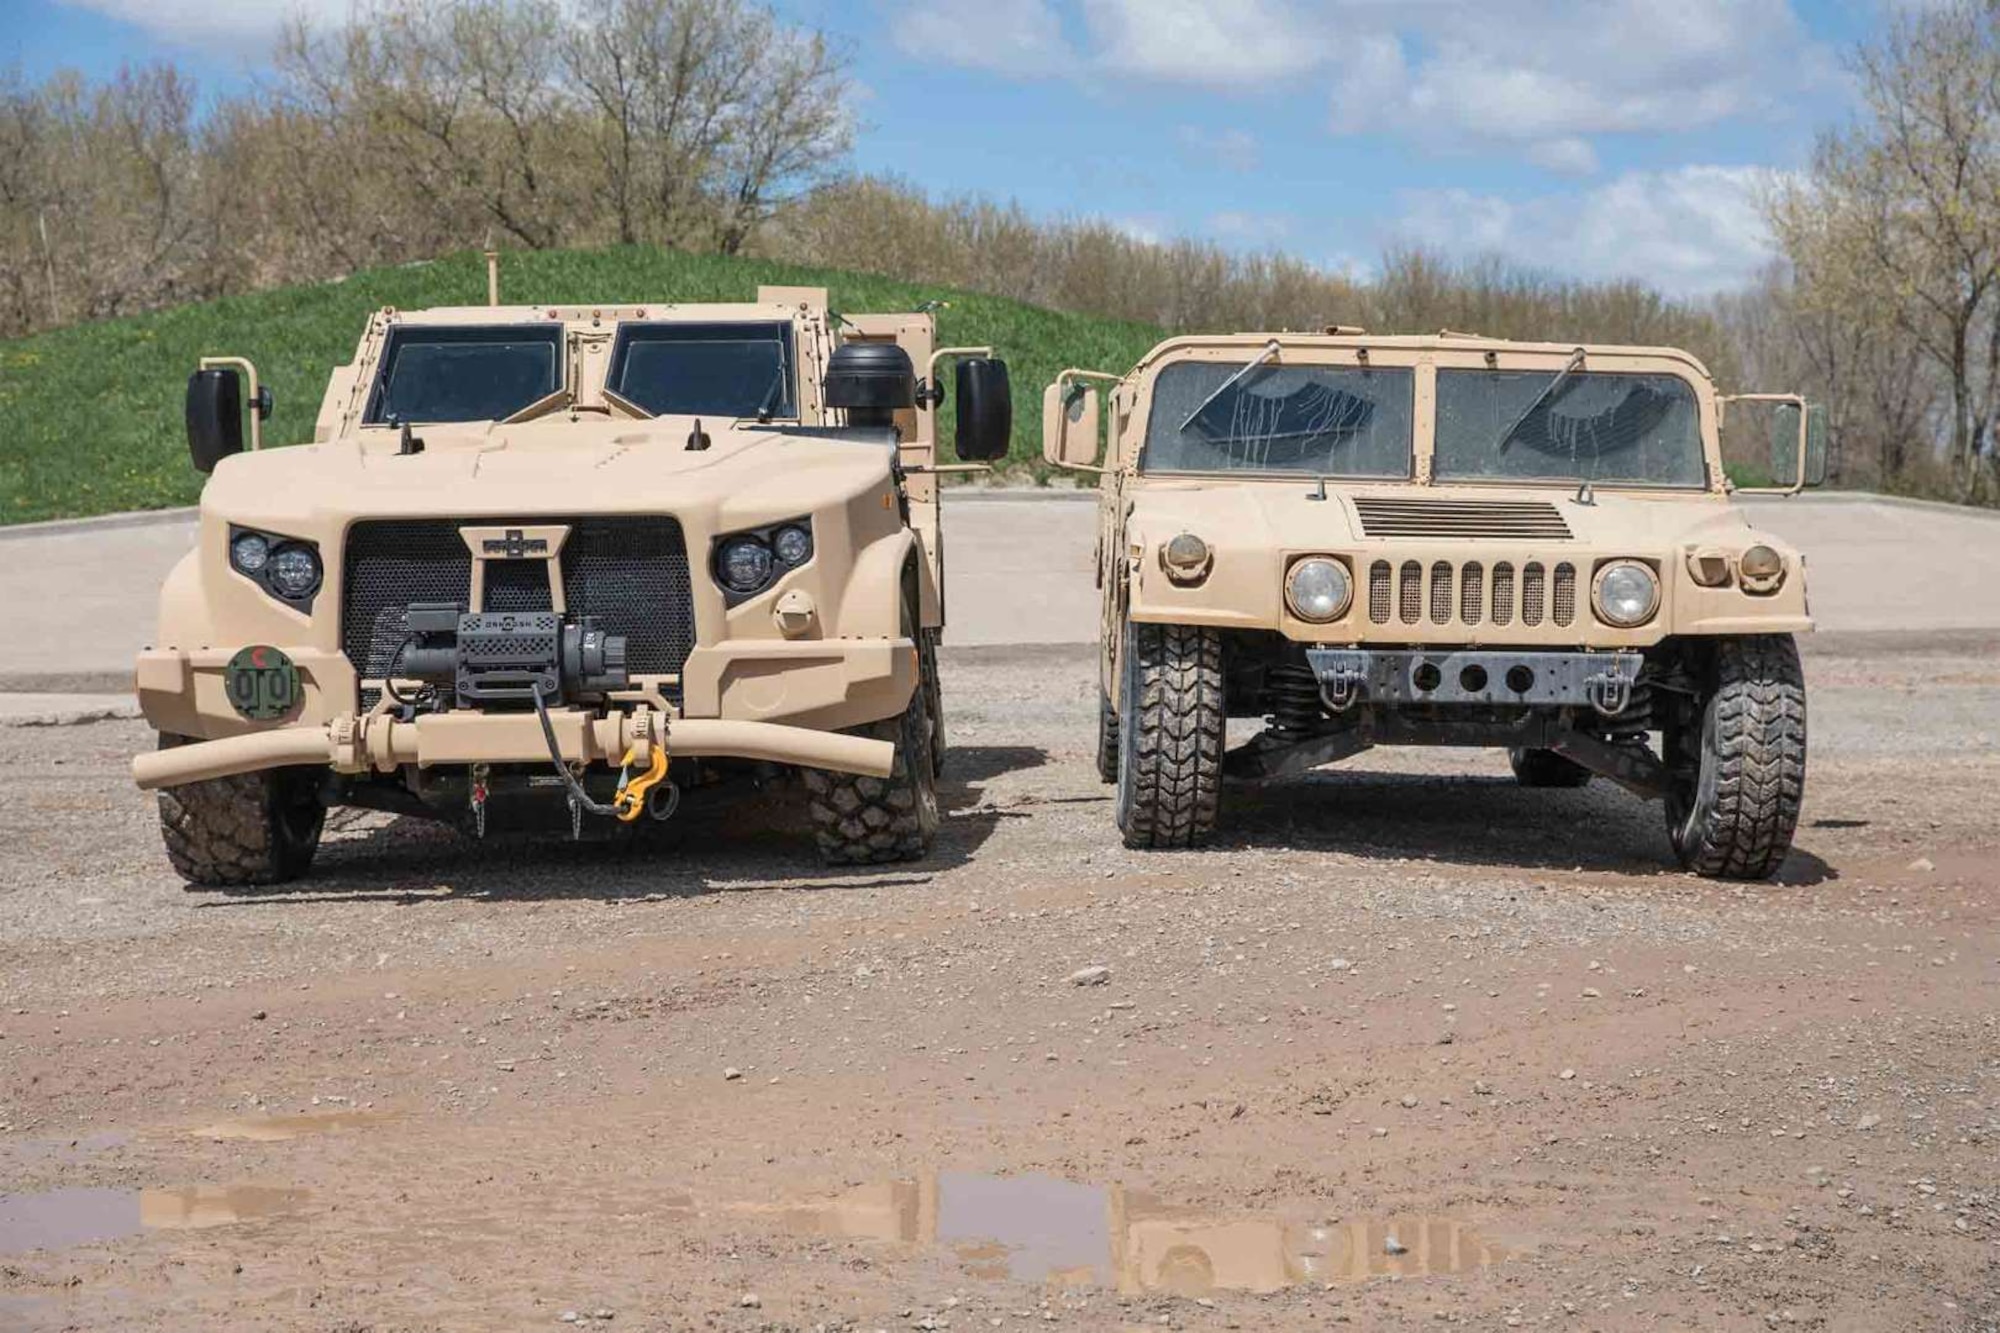 The Air Force Life Cycle Management Center's Agile Combat Support Directorate is working to replace the up-armored High Mobility Multipurpose Wheeled Vehicles, or Humvee (right), with the Joint Light Tactical Vehicles (left). (Courtesy Photo)